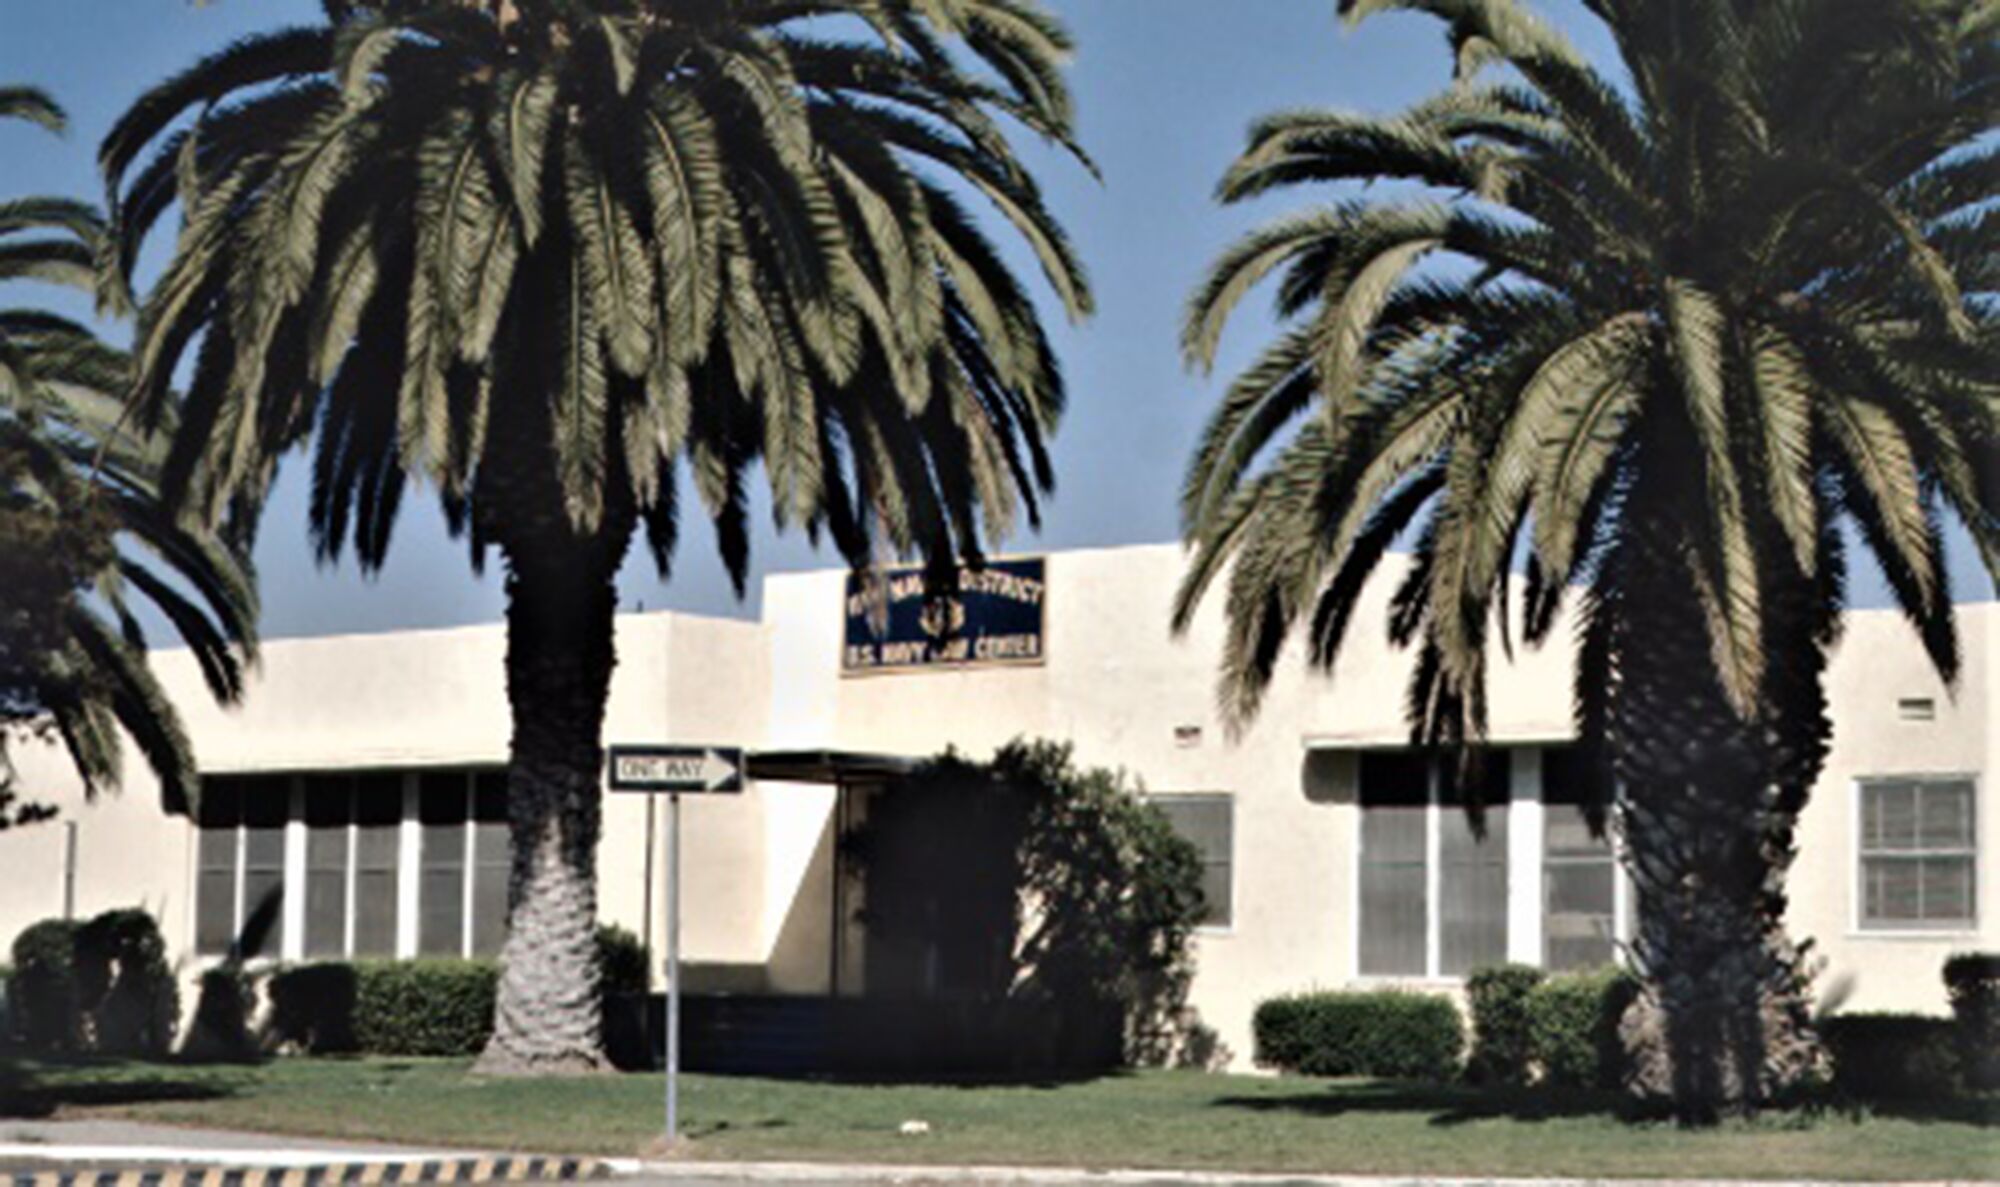 The San Diego Naval Station Law Center